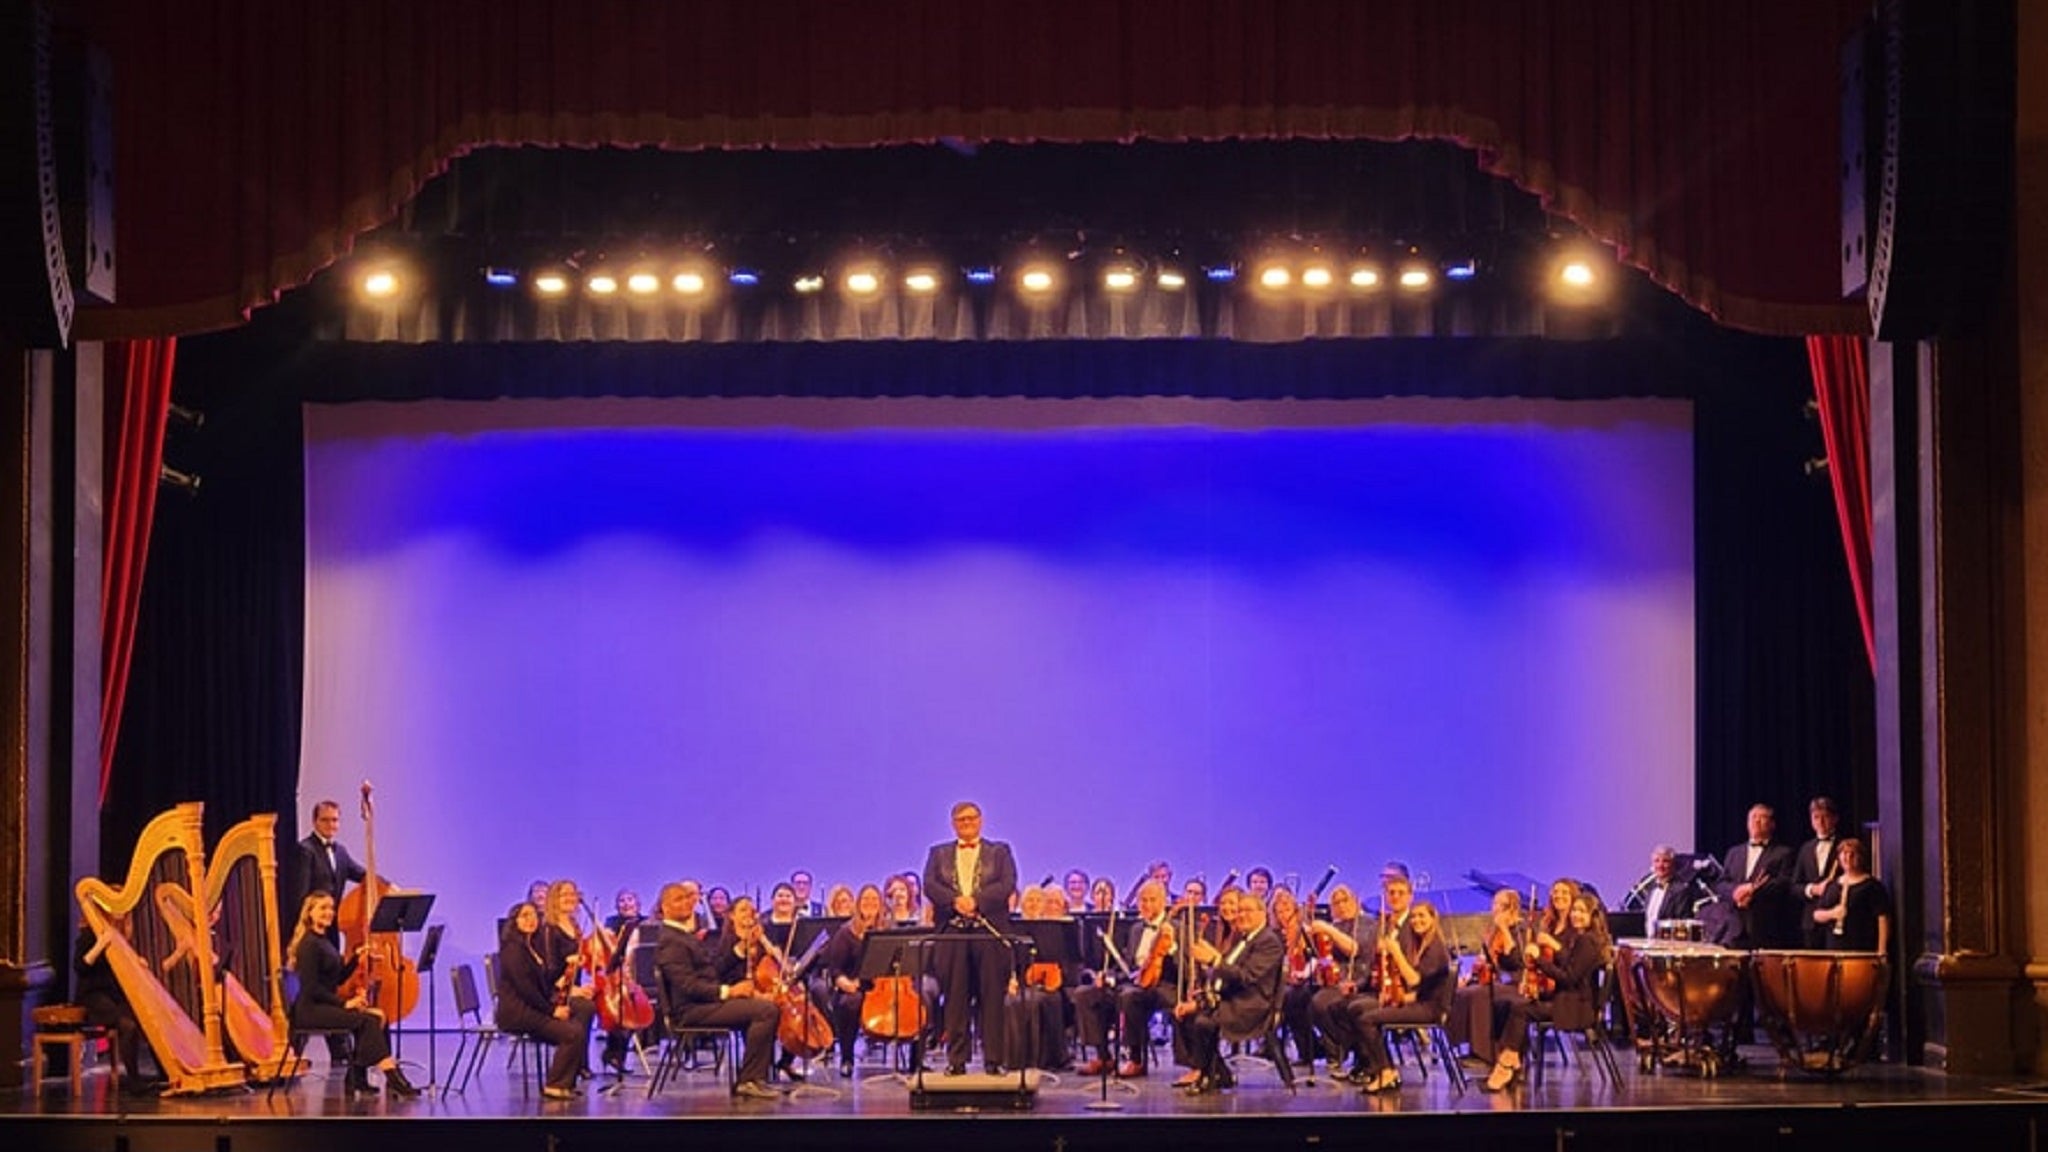 SUNY Orange Community Orchestra Concert at The Paramount Theatre (Middletown, NY) – Middletown, NY